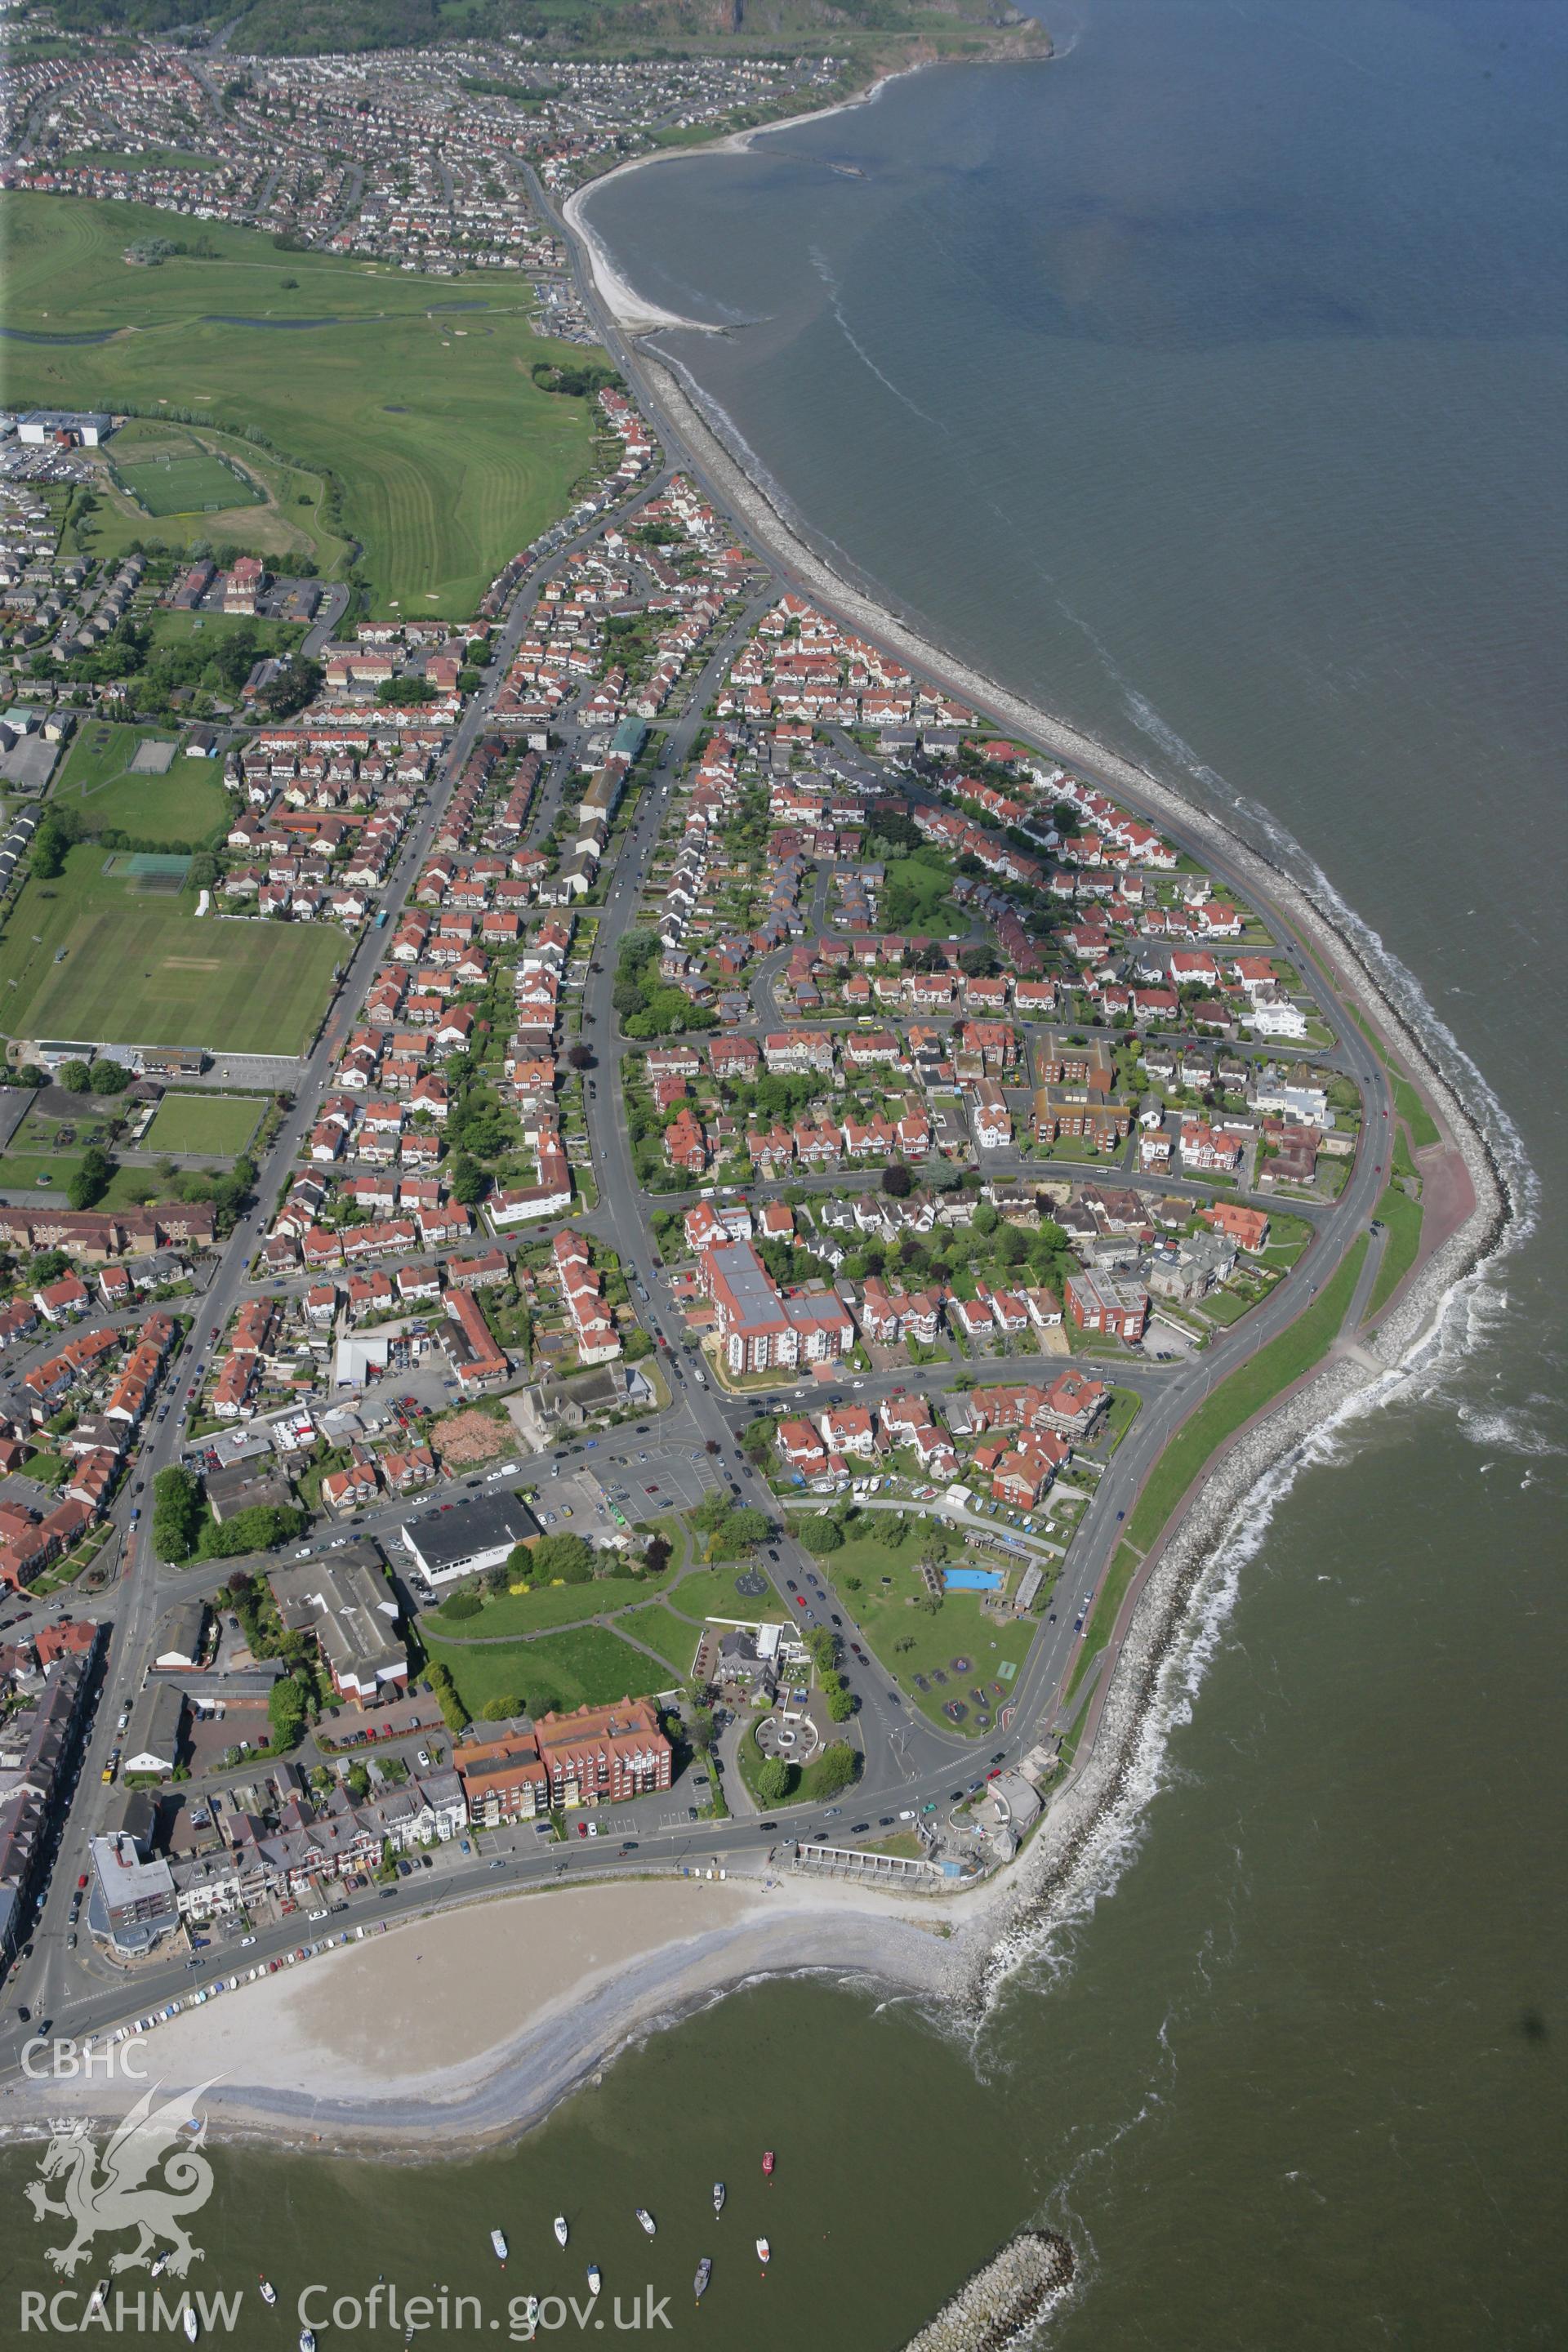 RCAHMW colour oblique photograph of Rhos-on-Sea. Taken by Toby Driver on 03/05/2011.